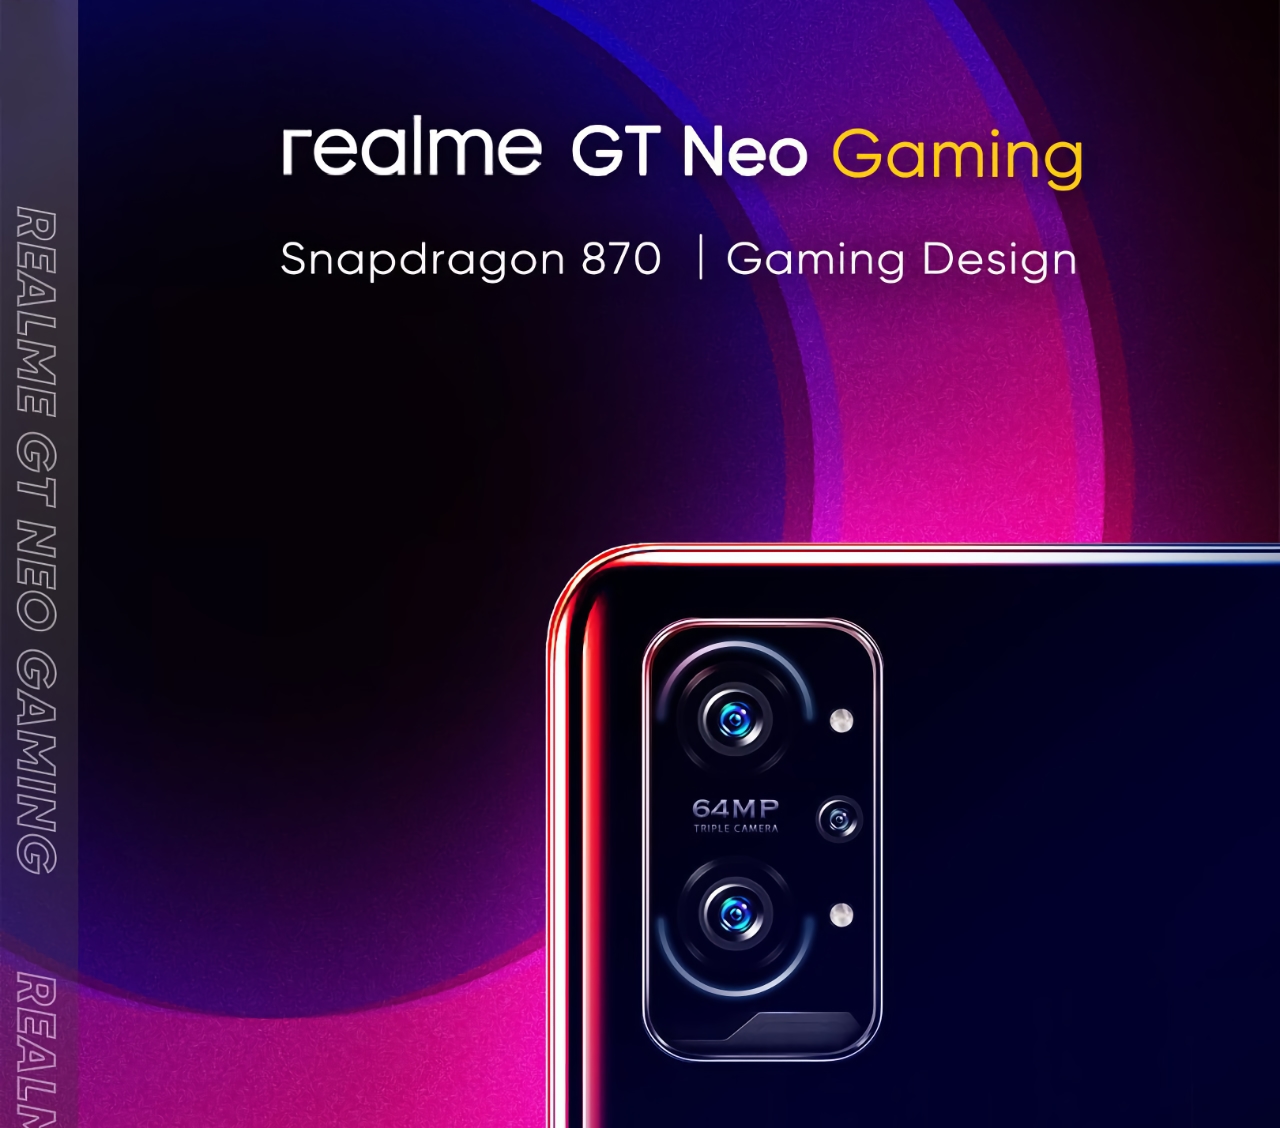 Realme will release a gaming version of the smartphone Realme GT Neo with chip Snapdragon 870 and a price tag from $499